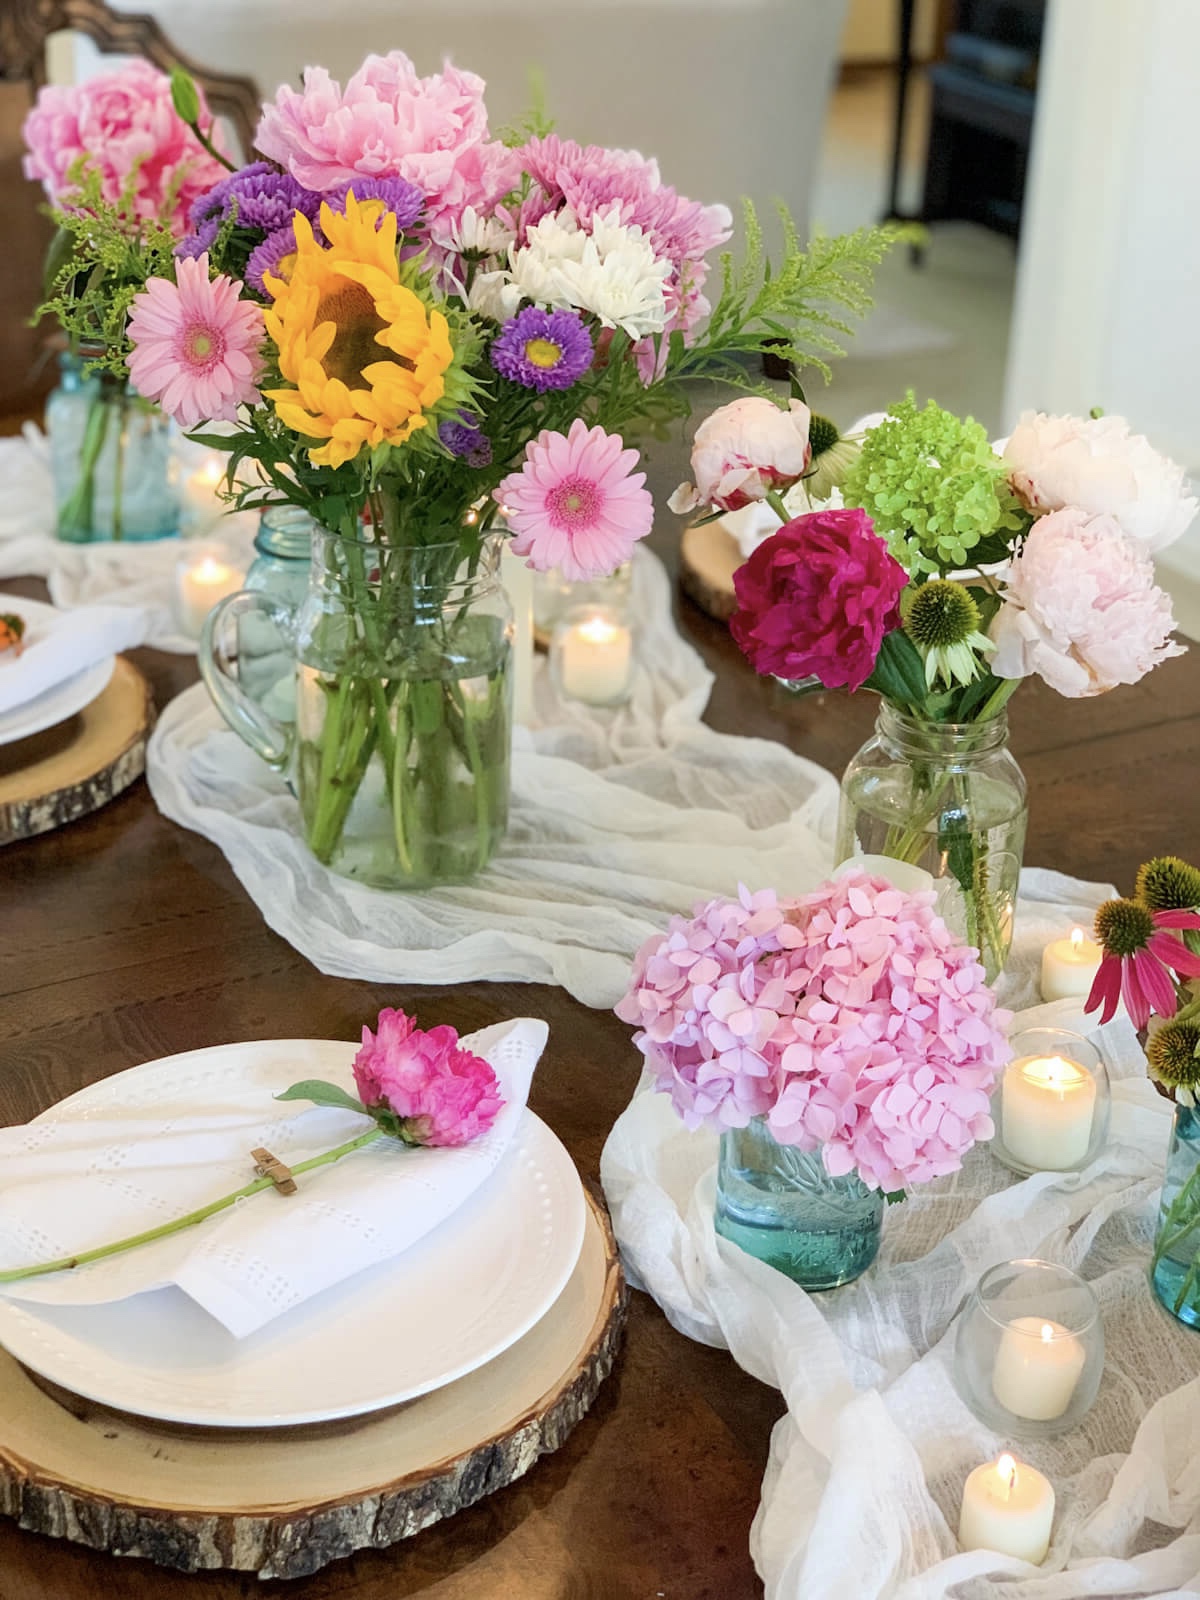 A place setting with a wood charger sits beside a summery country centerpiece with several flower arrangements in mason jars.